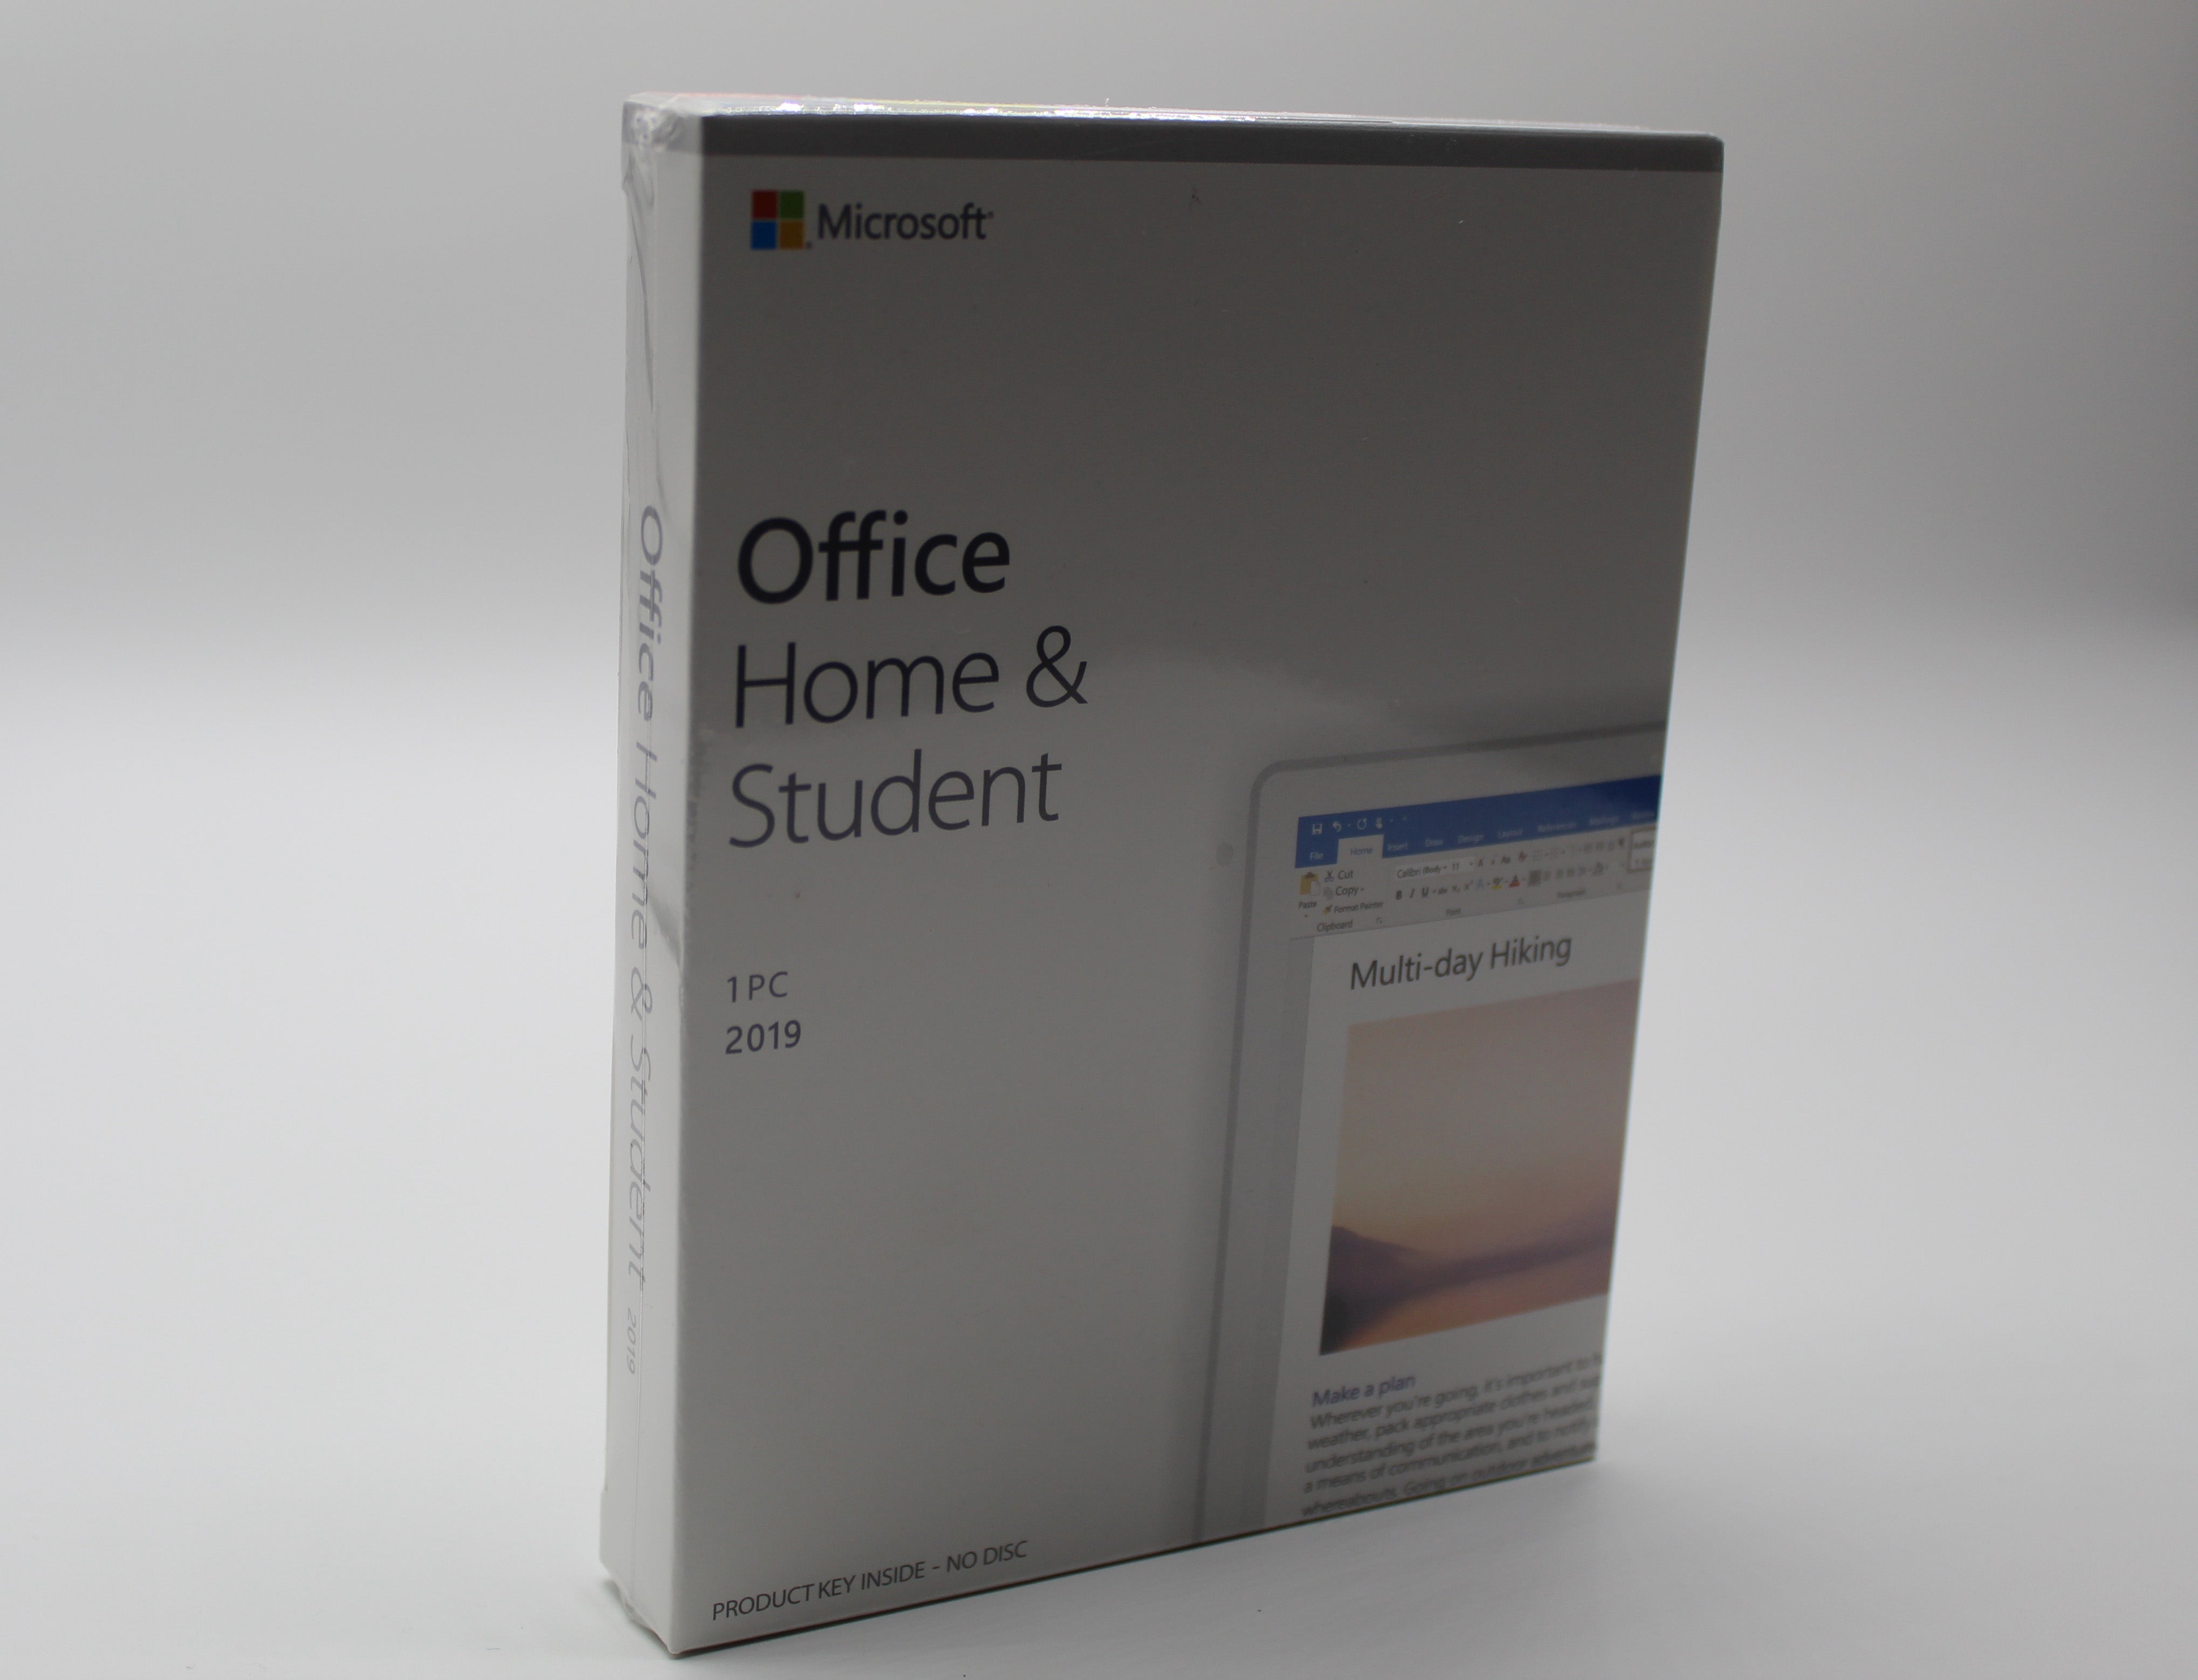 Microsoft Home & Student 2019 for Windows 10 - Retail Box with key card